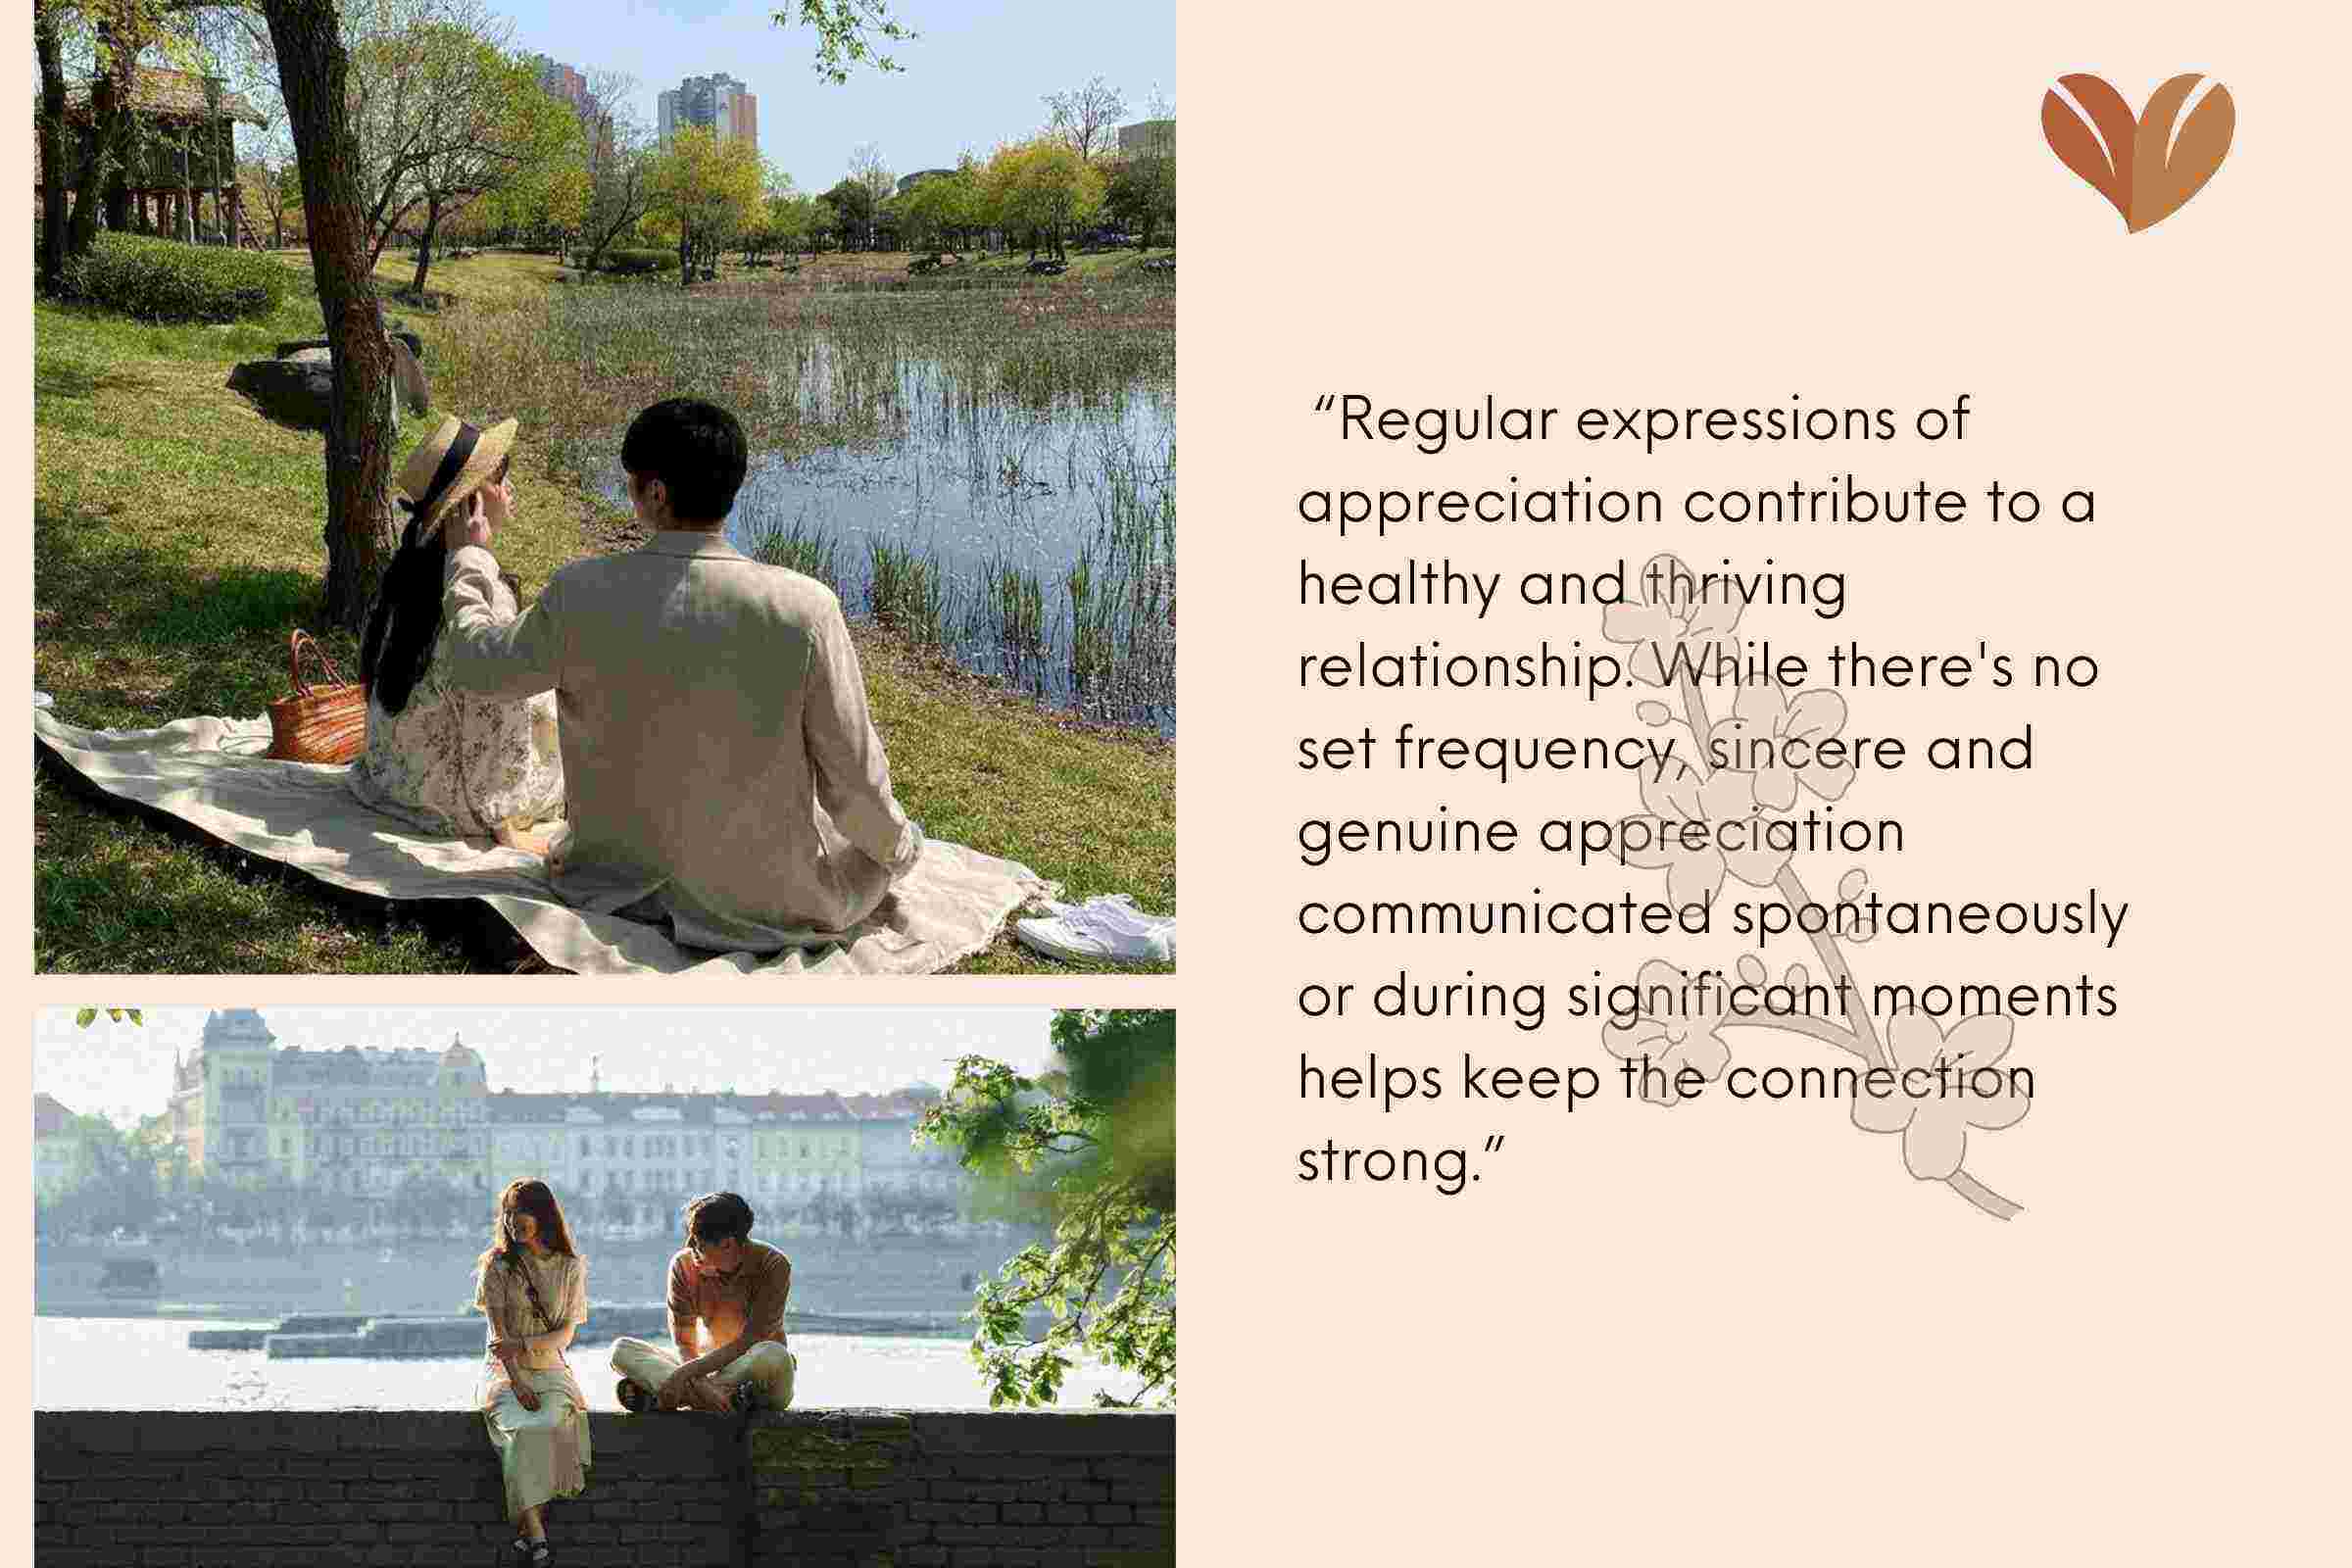 “Regular expressions of appreciation contribute to a healthy and thriving relationship. While there's no set frequency, sincere and genuine appreciation communicated spontaneously or during significant moments helps keep the connection strong.”